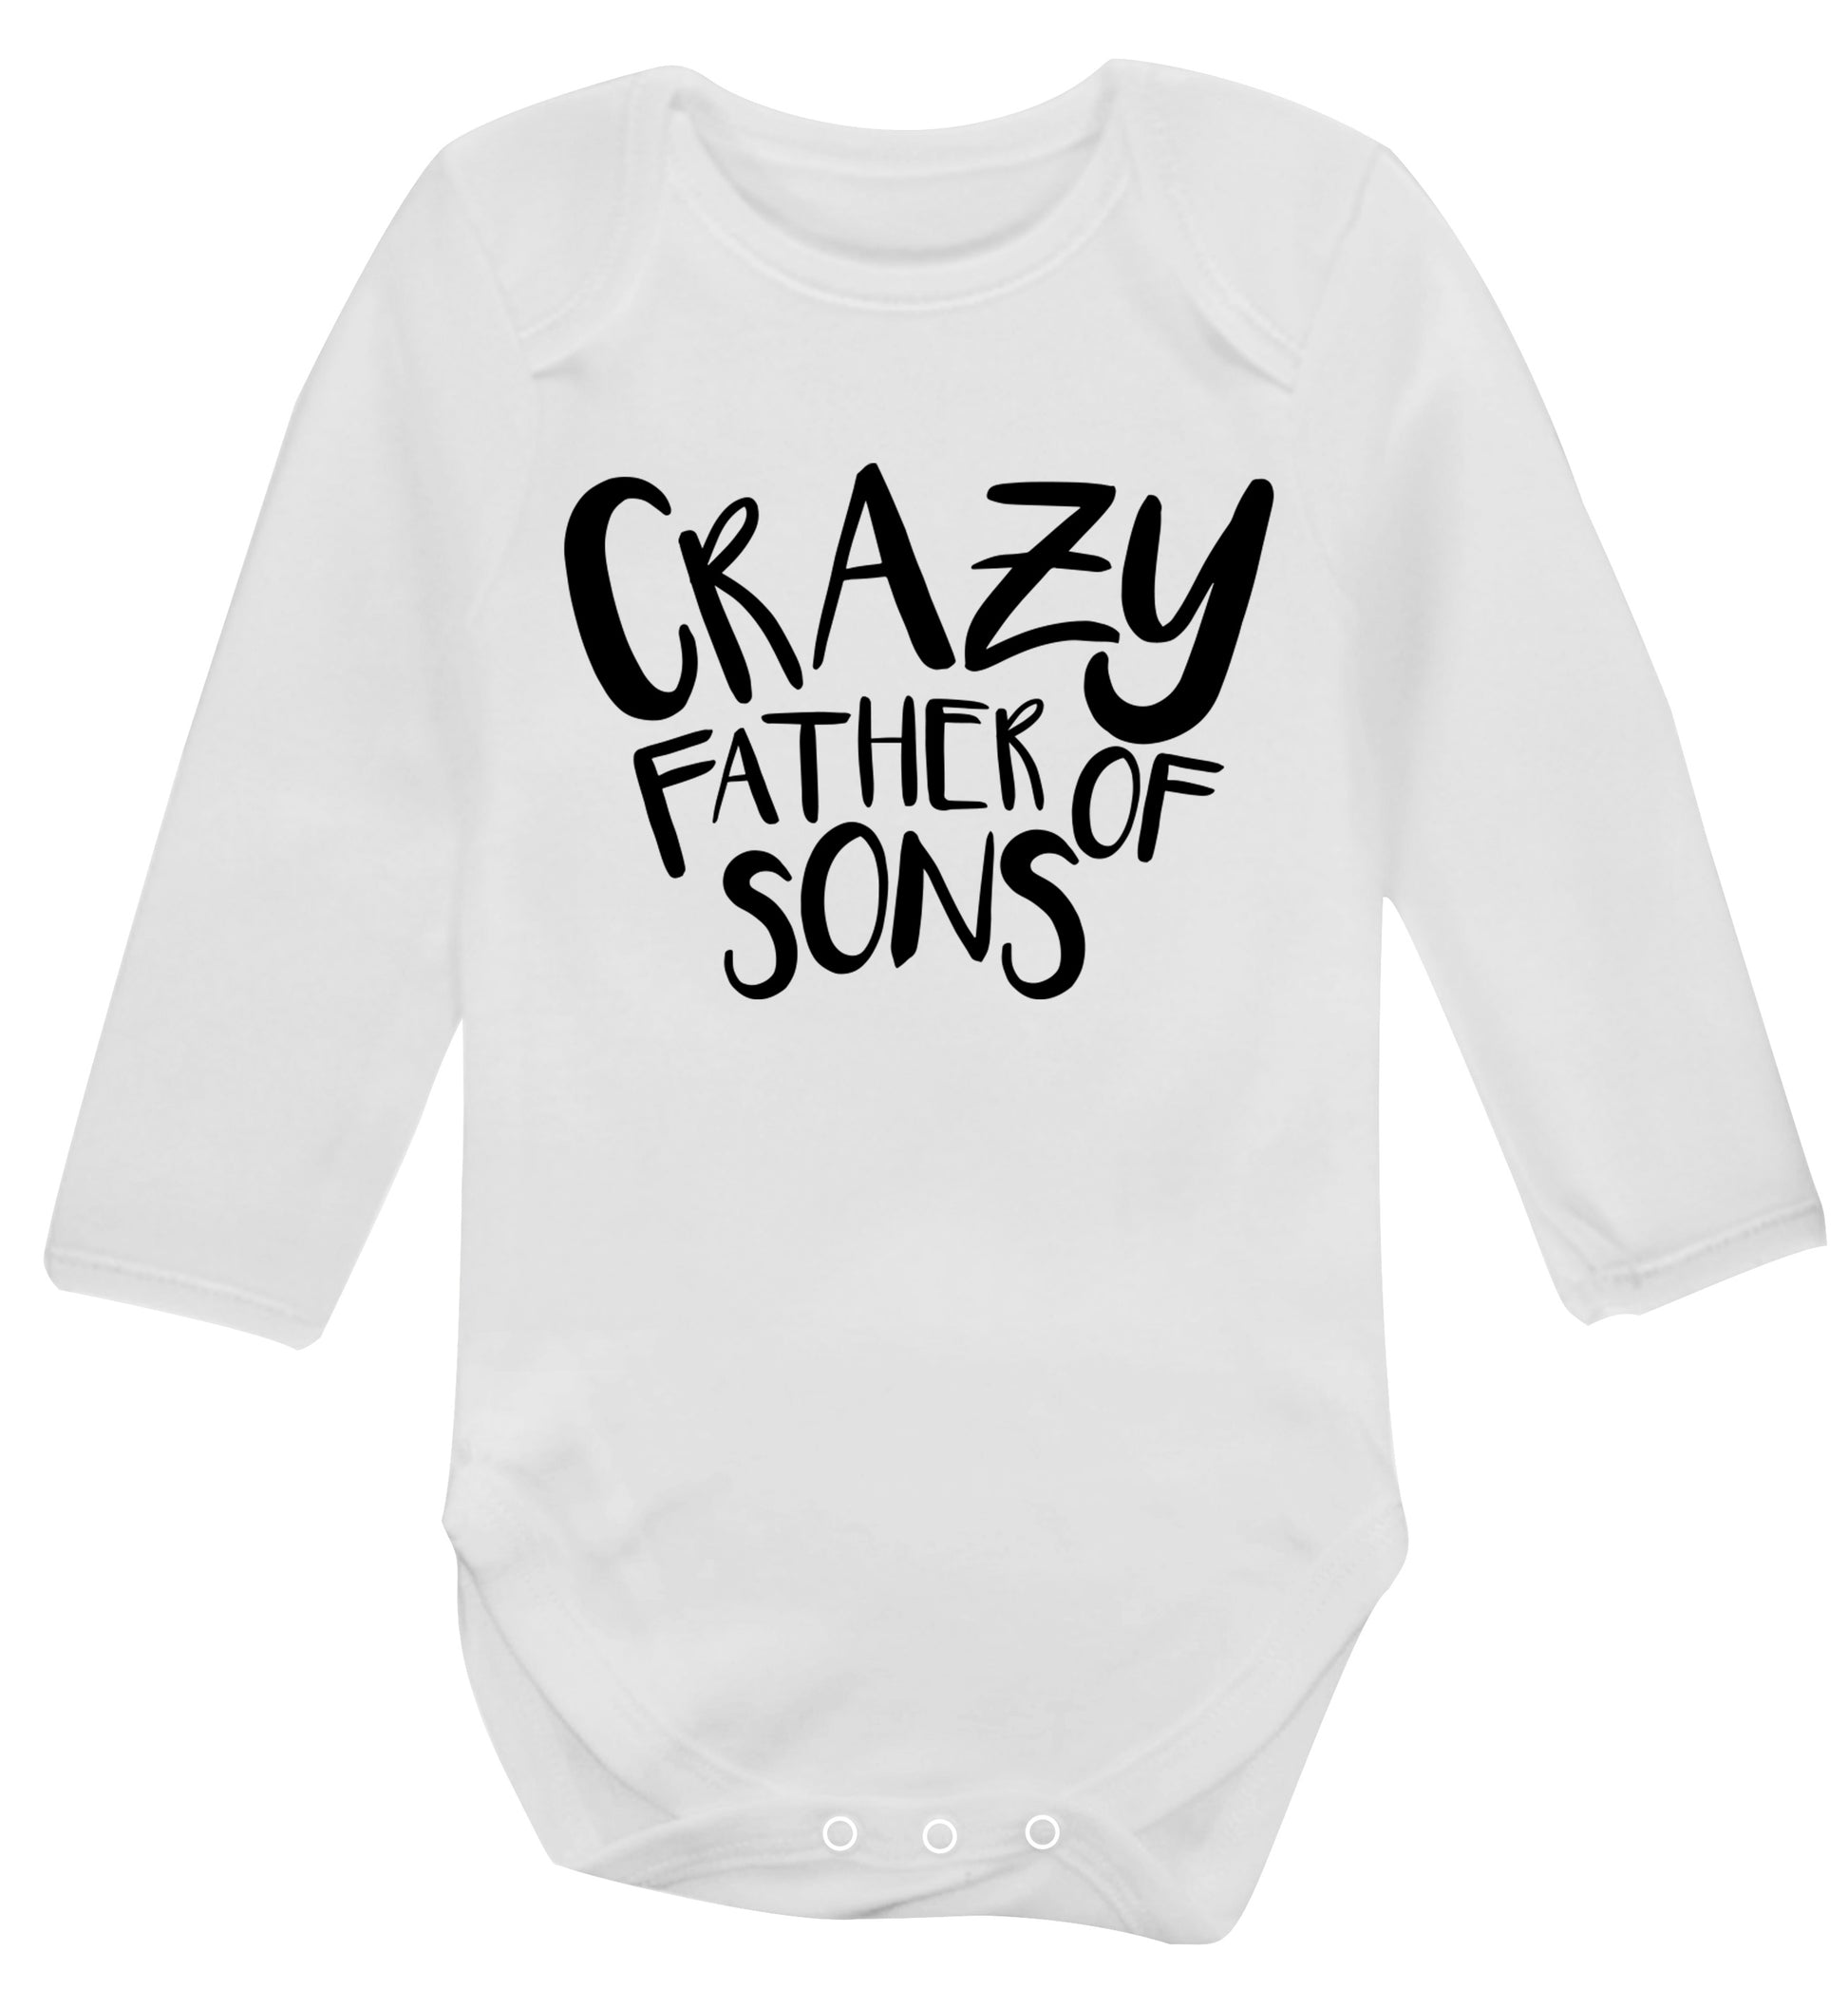 Crazy father of sons Baby Vest long sleeved white 6-12 months